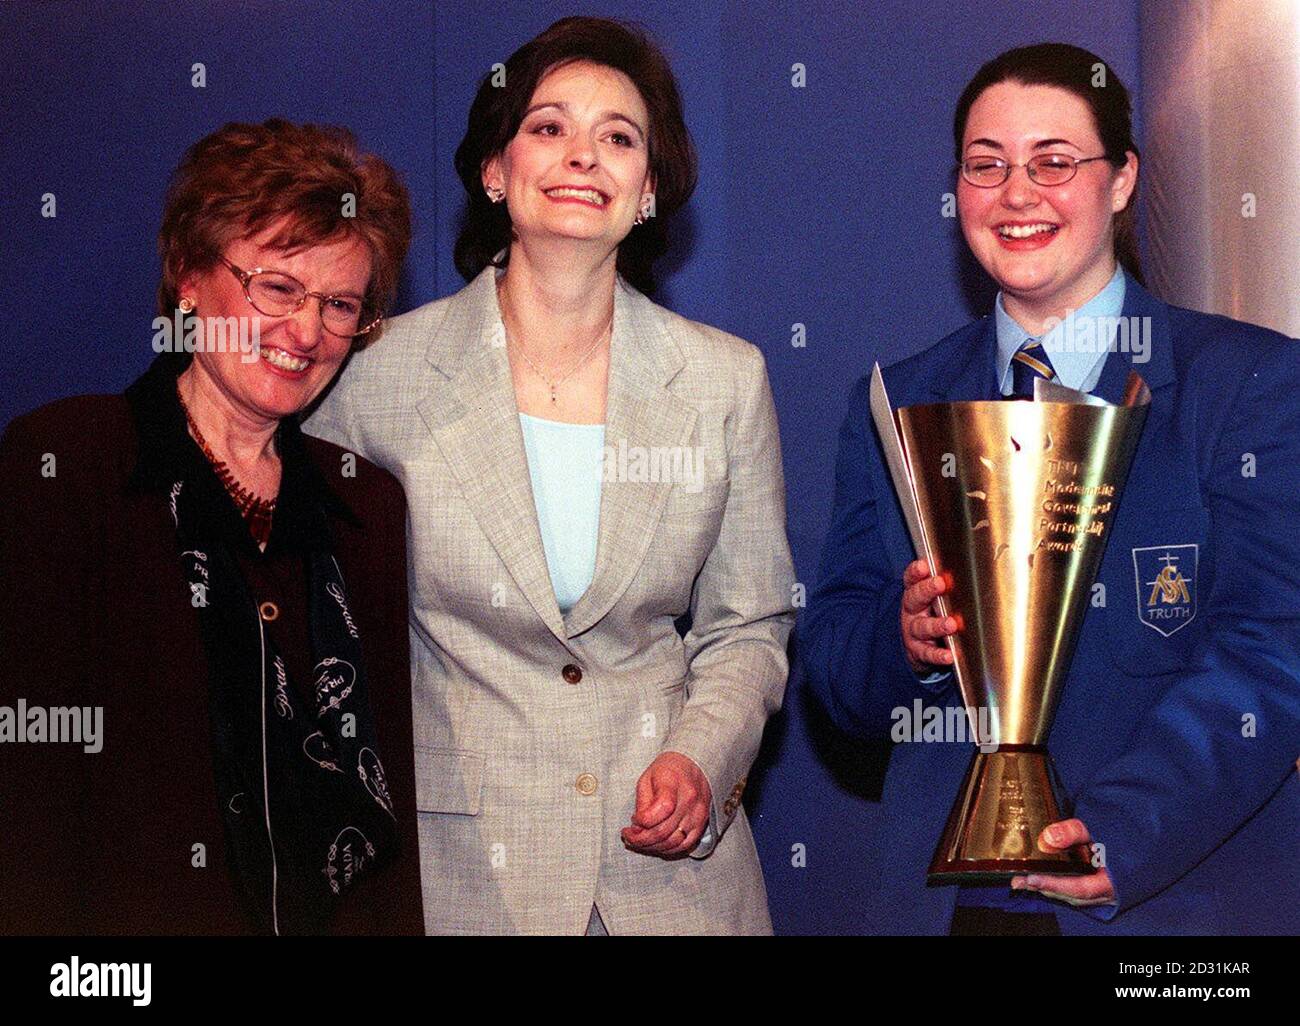 Prime Minister's wife Cherie Booth (centre), presents St Mary's College from Londonderry in Northern Ireland's Head Girl Laura McLaughlan (R) and Headmistress Dame Geraldine Keegan with the 2001 TNT Moderning Government Partnership Award.  *   at a presentation ceremony at London's Savoy. The college won the award for dramatically increasing standards in academic achievement through partnership working.  Stock Photo